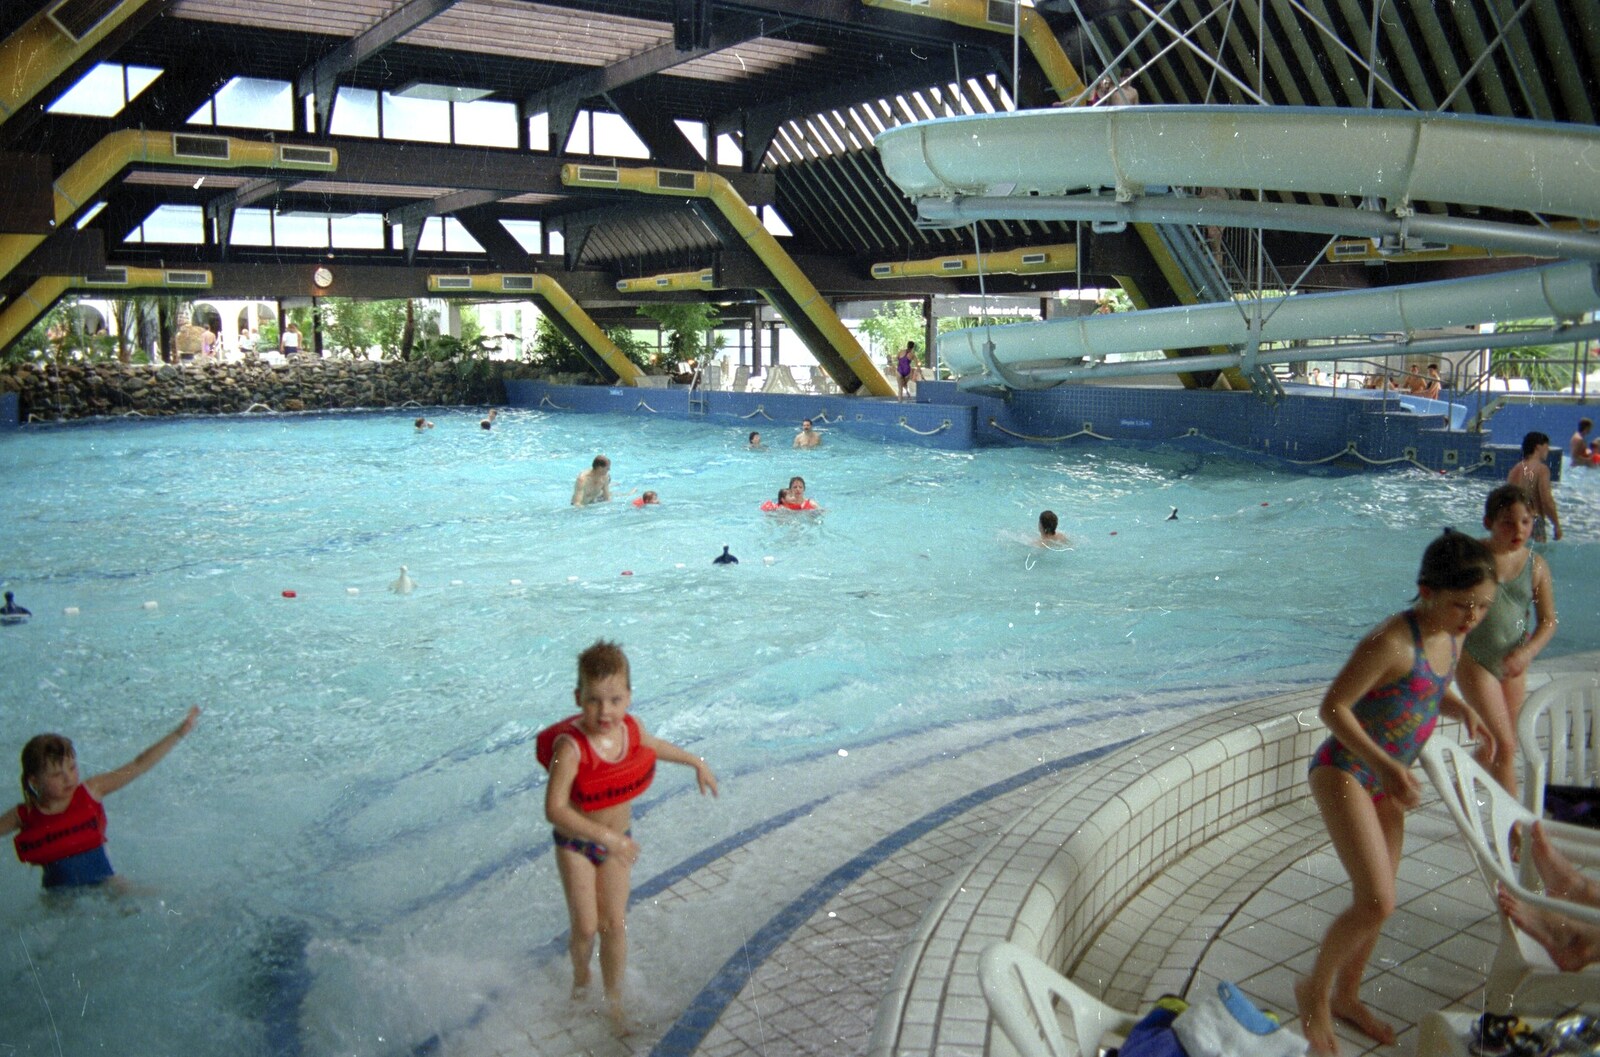 A Trip to Center Parcs, Eemhof, Netherlands - 24th March 1992: The big indoor pool